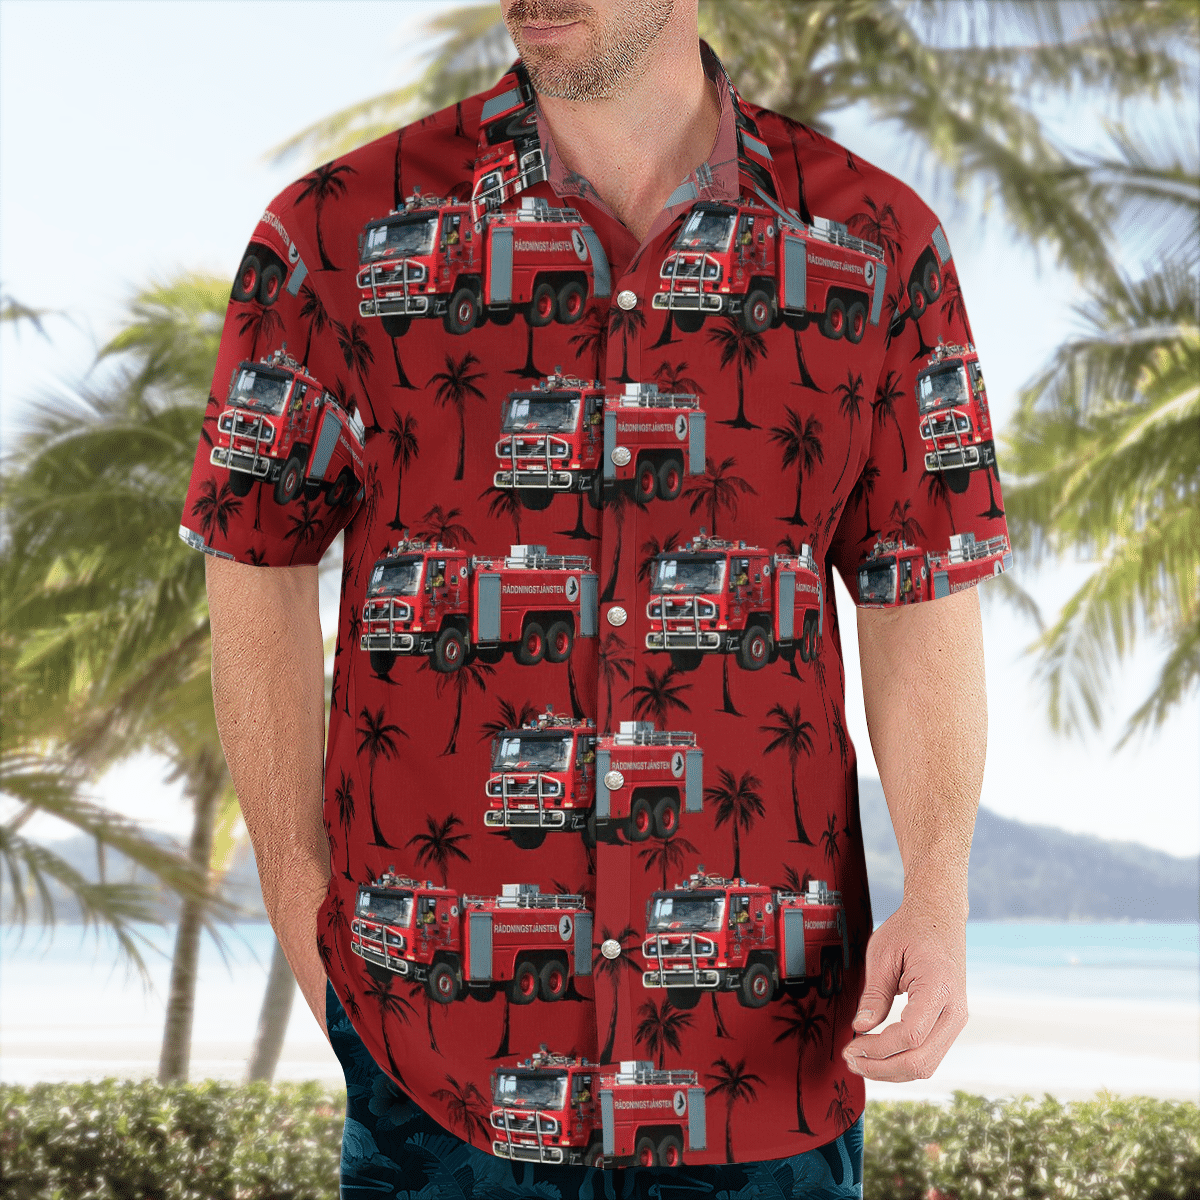 There are several styles of beach and Hawaiian shorts and tops to choose from 41